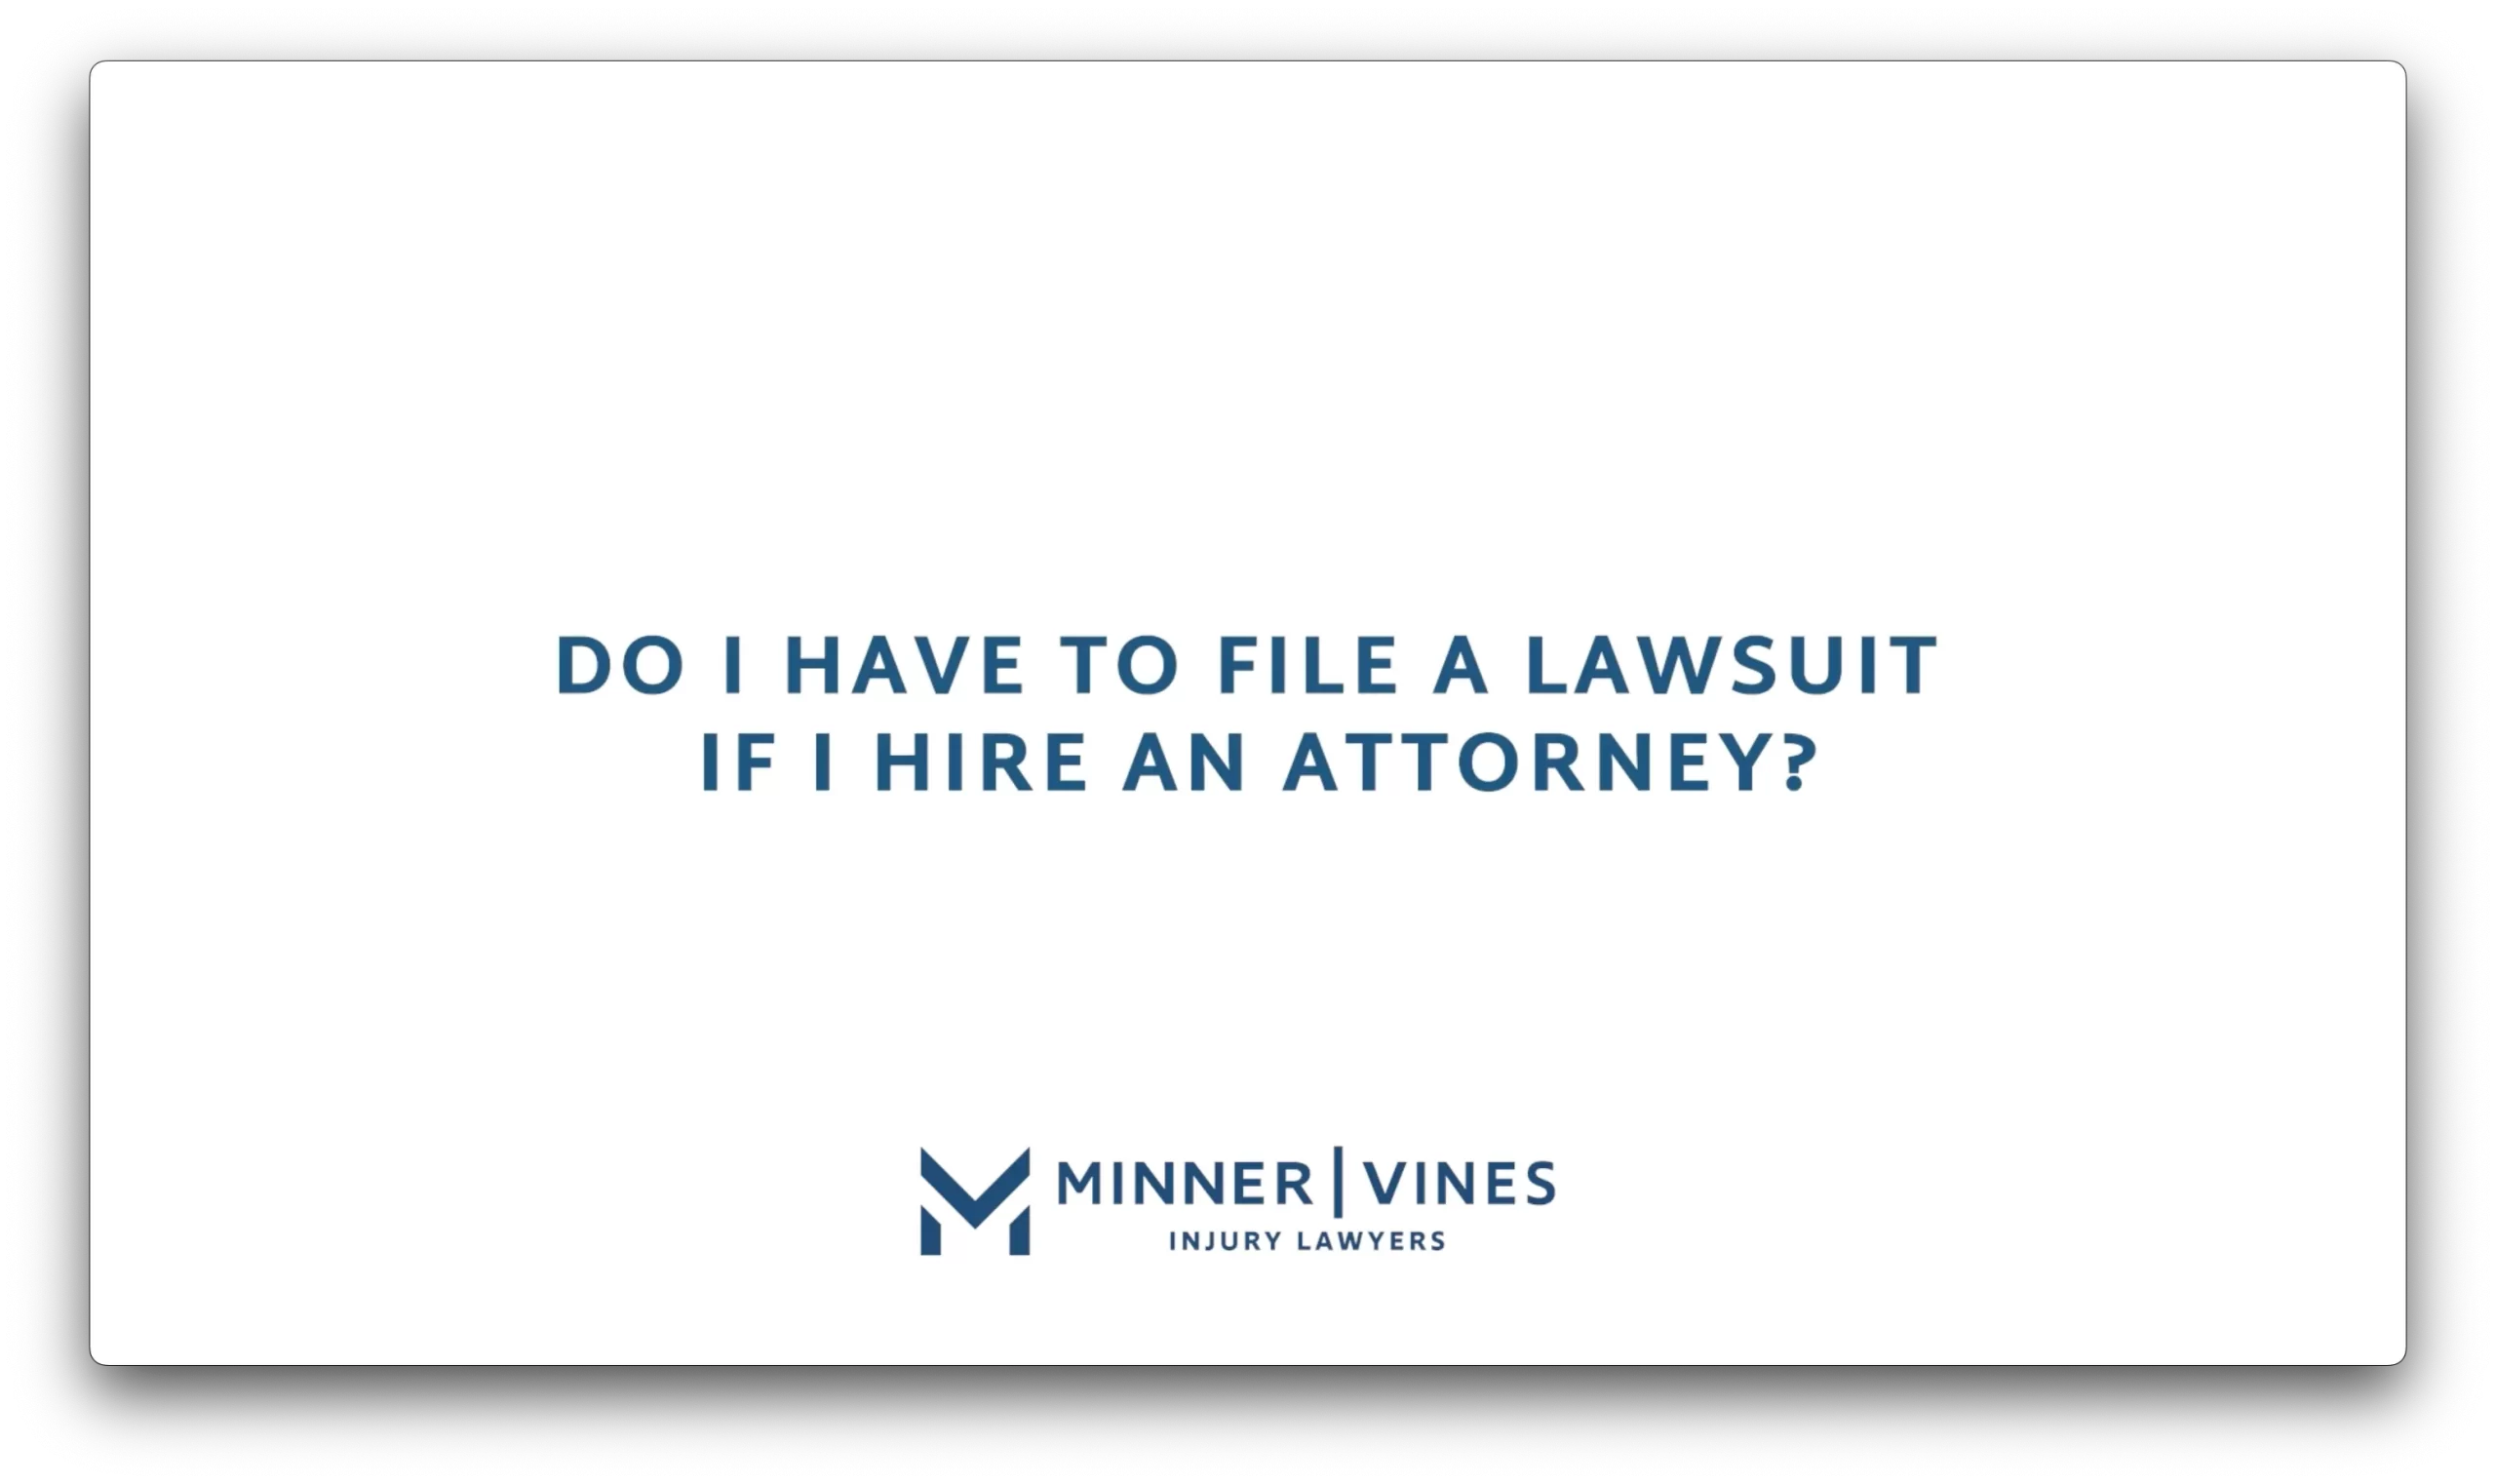 Do I have to file a lawsuit if I hire an attorney?